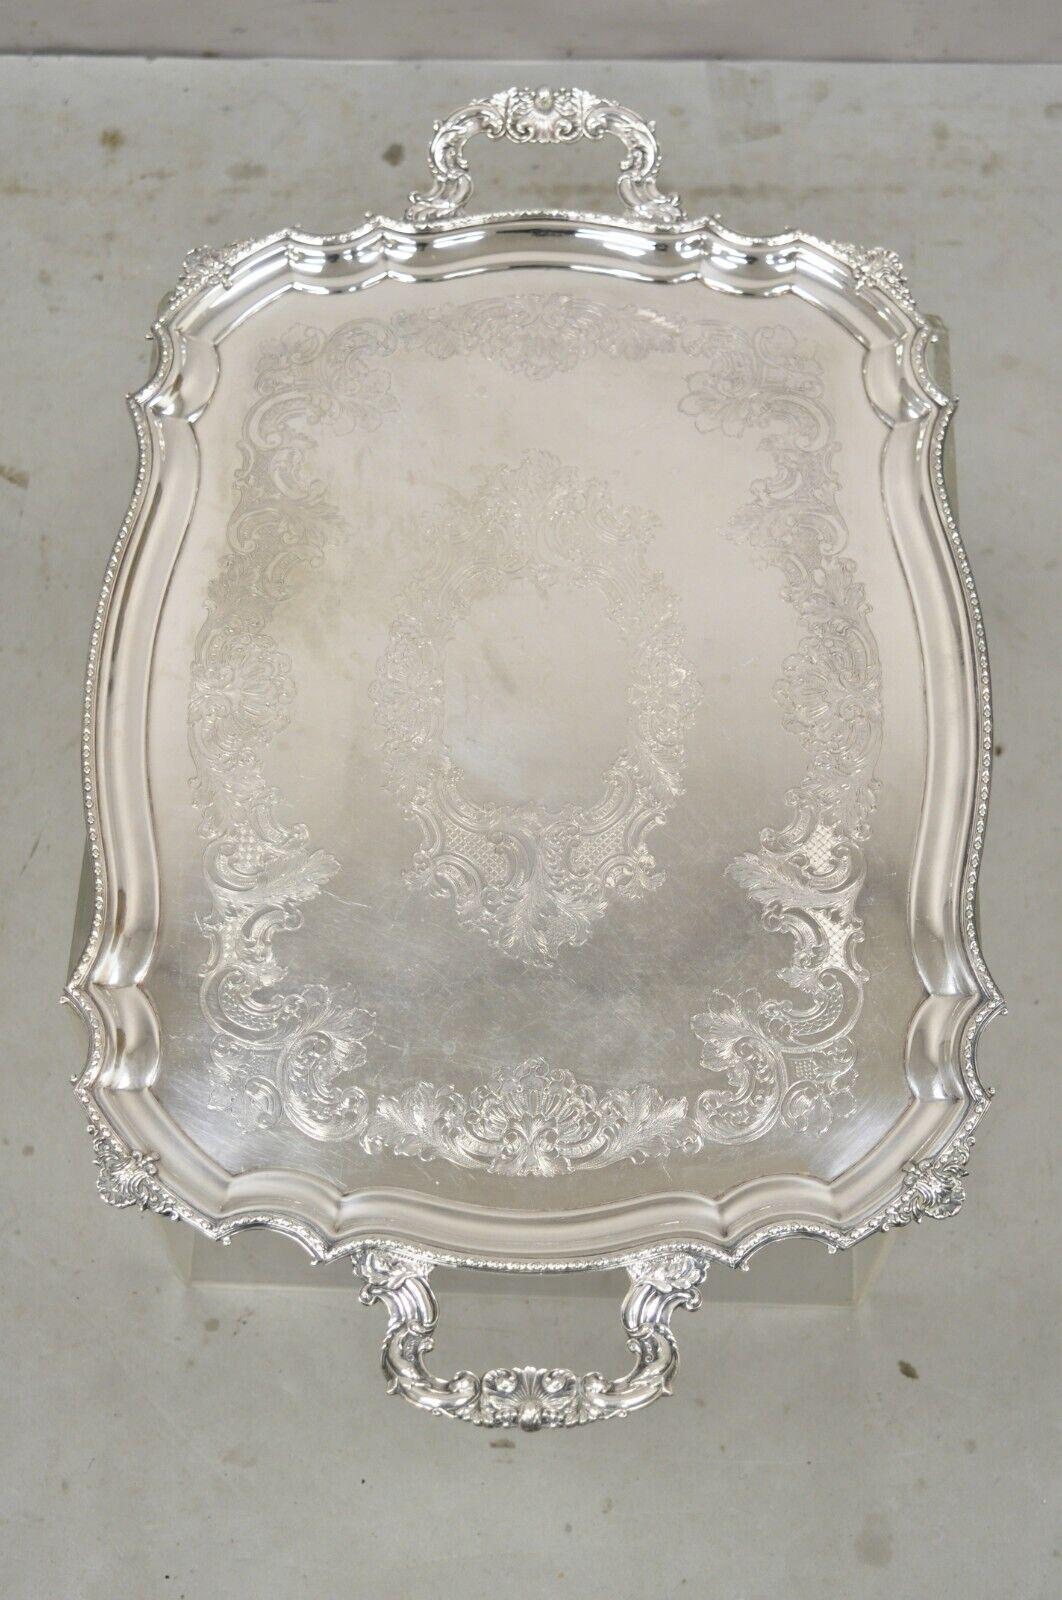 Victorian WA England Silver Plated Ornate Twin Handle Serving Platter Tray For Sale 7